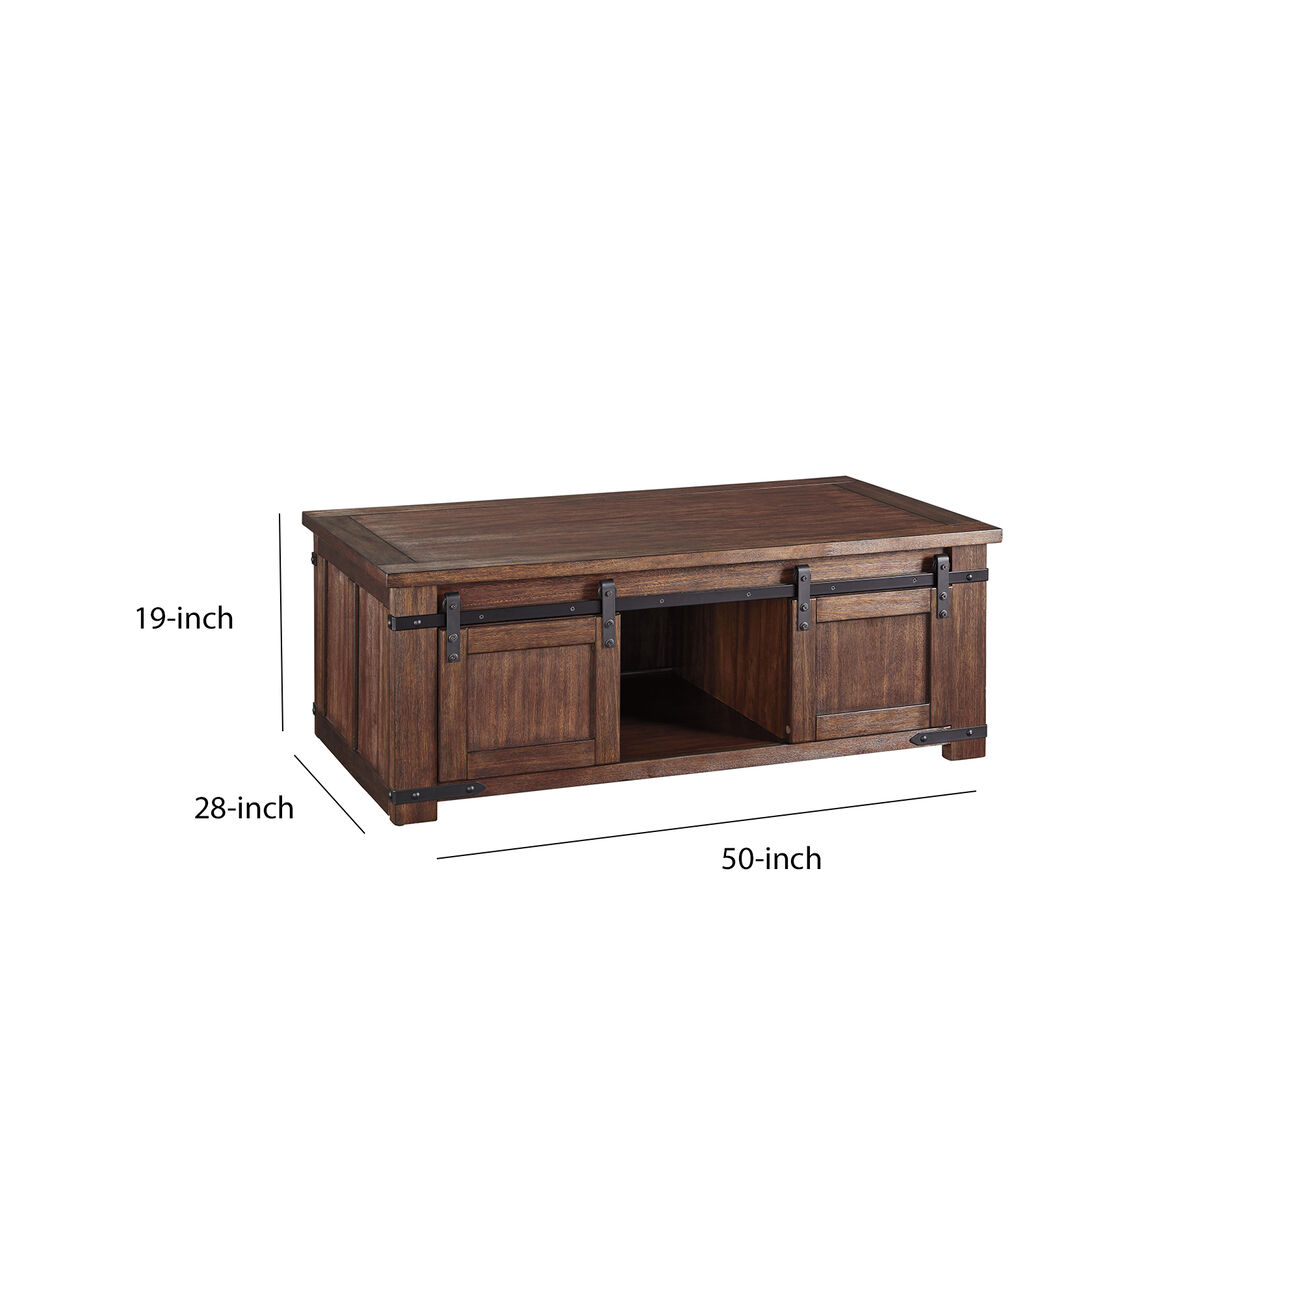 Rectangular Wooden Cocktail Table with 2 Barn Sliding Door Cabinets, Brown